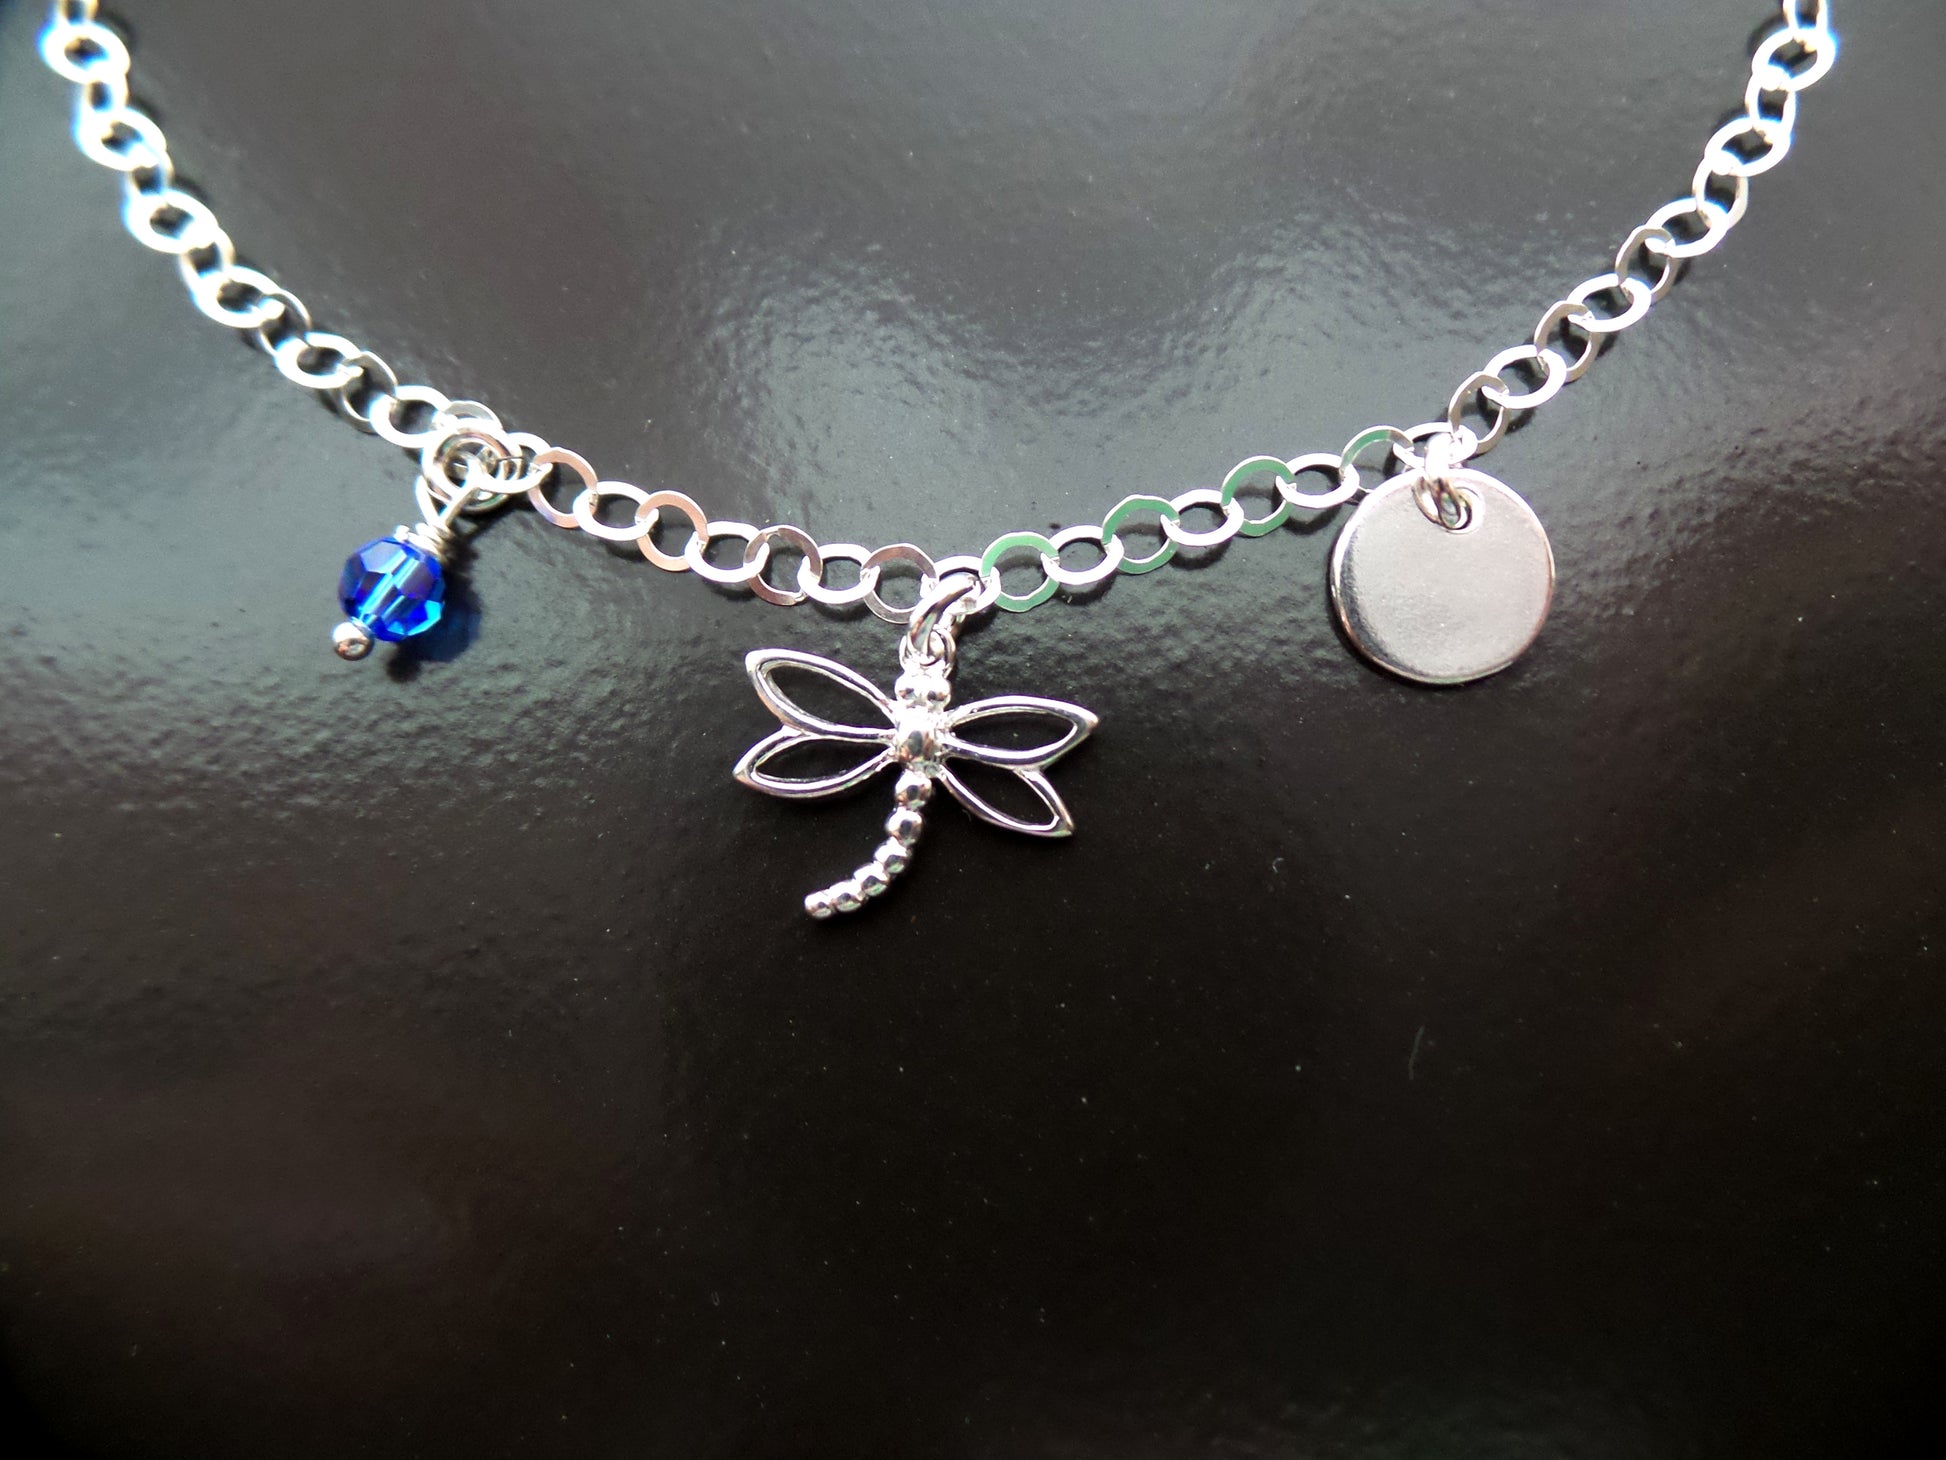 Deluxe Personalized Dragonfly, Eternity, Initial, Birthstone Ankle Bracelet-Anklet -Sterling Silver- Crystal Birthstones-Hand stamped Initial pendants on Sparkly Chain